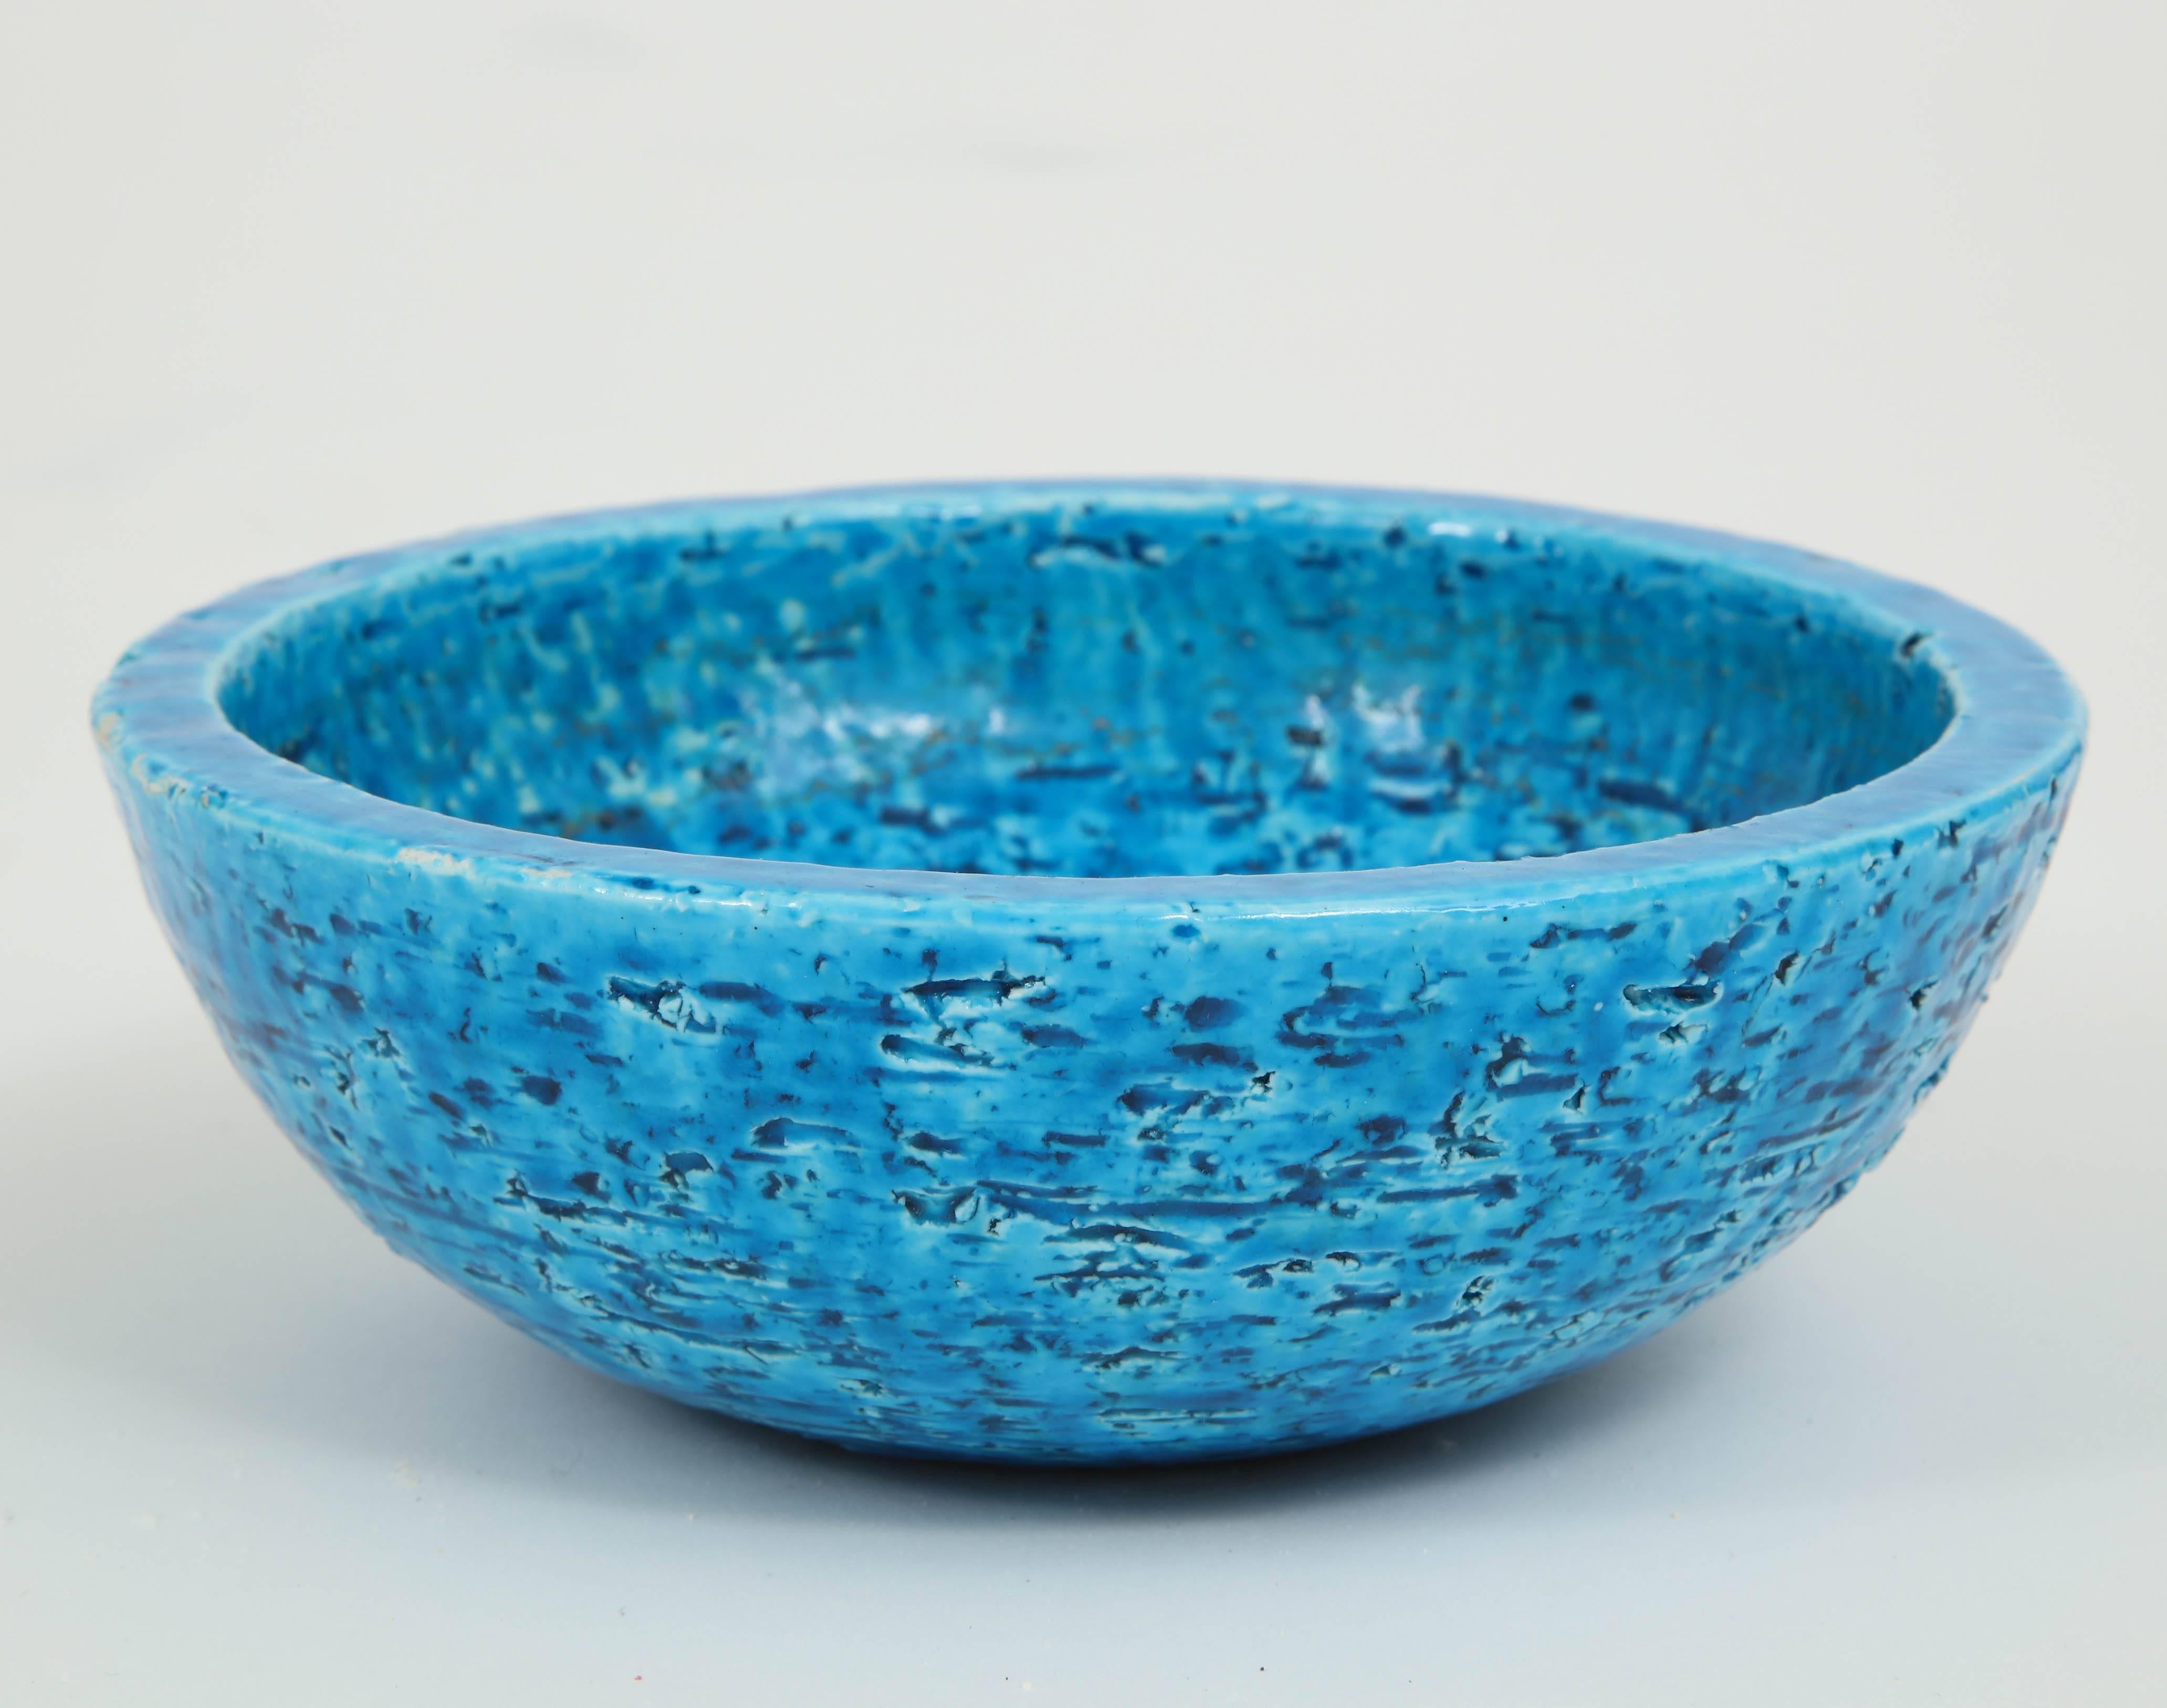 Decorative bowl by Gunnar Nylund, Sweden, circa 1950. The bowl is from the Design Group called 